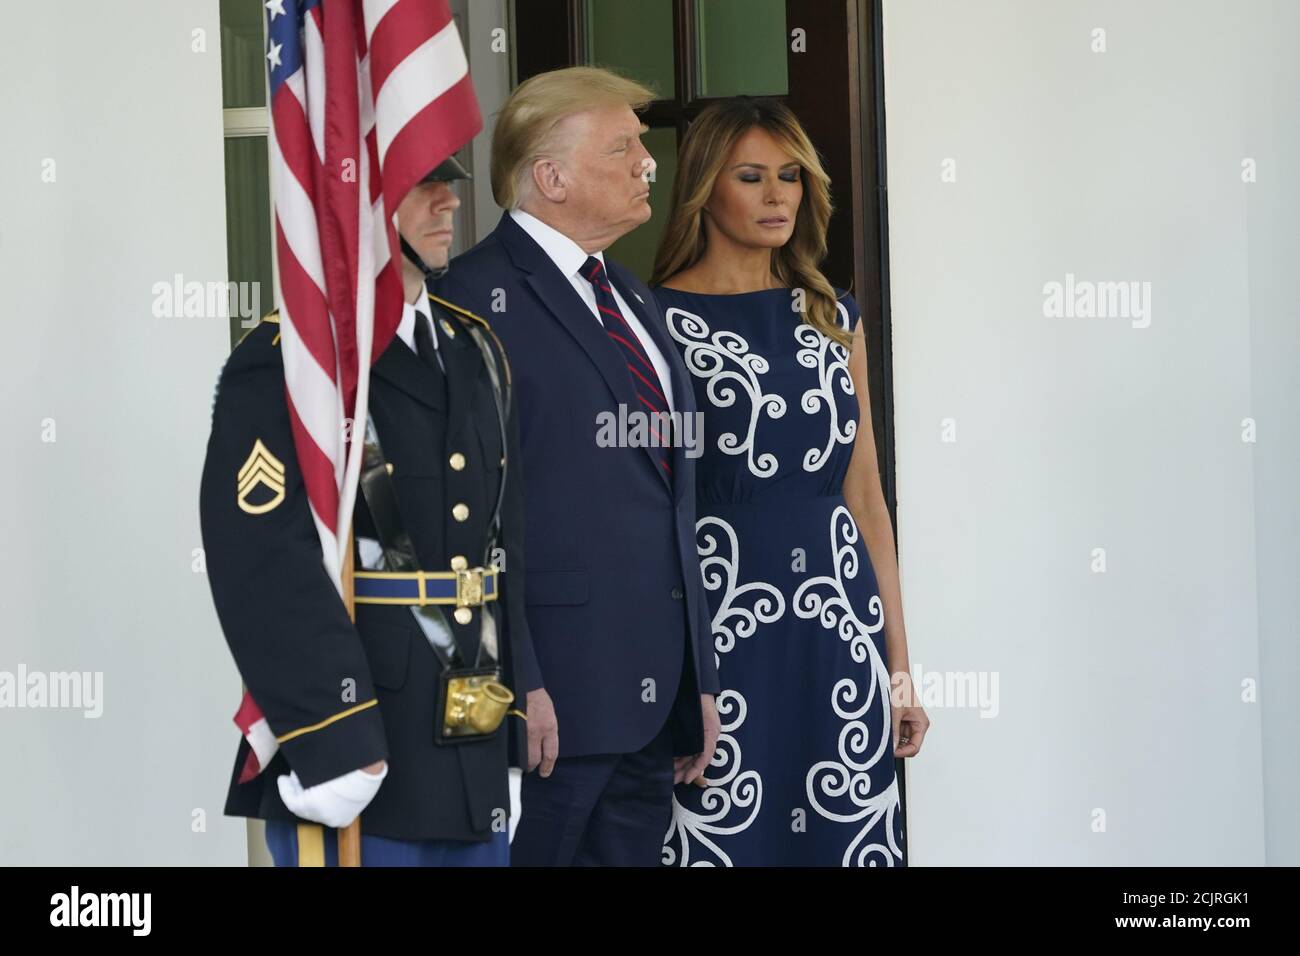 Washington DC, USA. 15th Sep, 2020. President Donald J. Trump and first lady Melania Trump welcomes Prime Minister Benjamin Netanyahu of Israel, and his wife Sara, to the White House in Washington, DC on Tuesday, September 15, 2020. Netanyahu is in Washington to sign the Abraham Accords, a peace treaty between Israel and the United Arab Emirates, and a declaration of intent to make peace with Bahrain. Credit: UPI/Alamy Live News Stock Photo